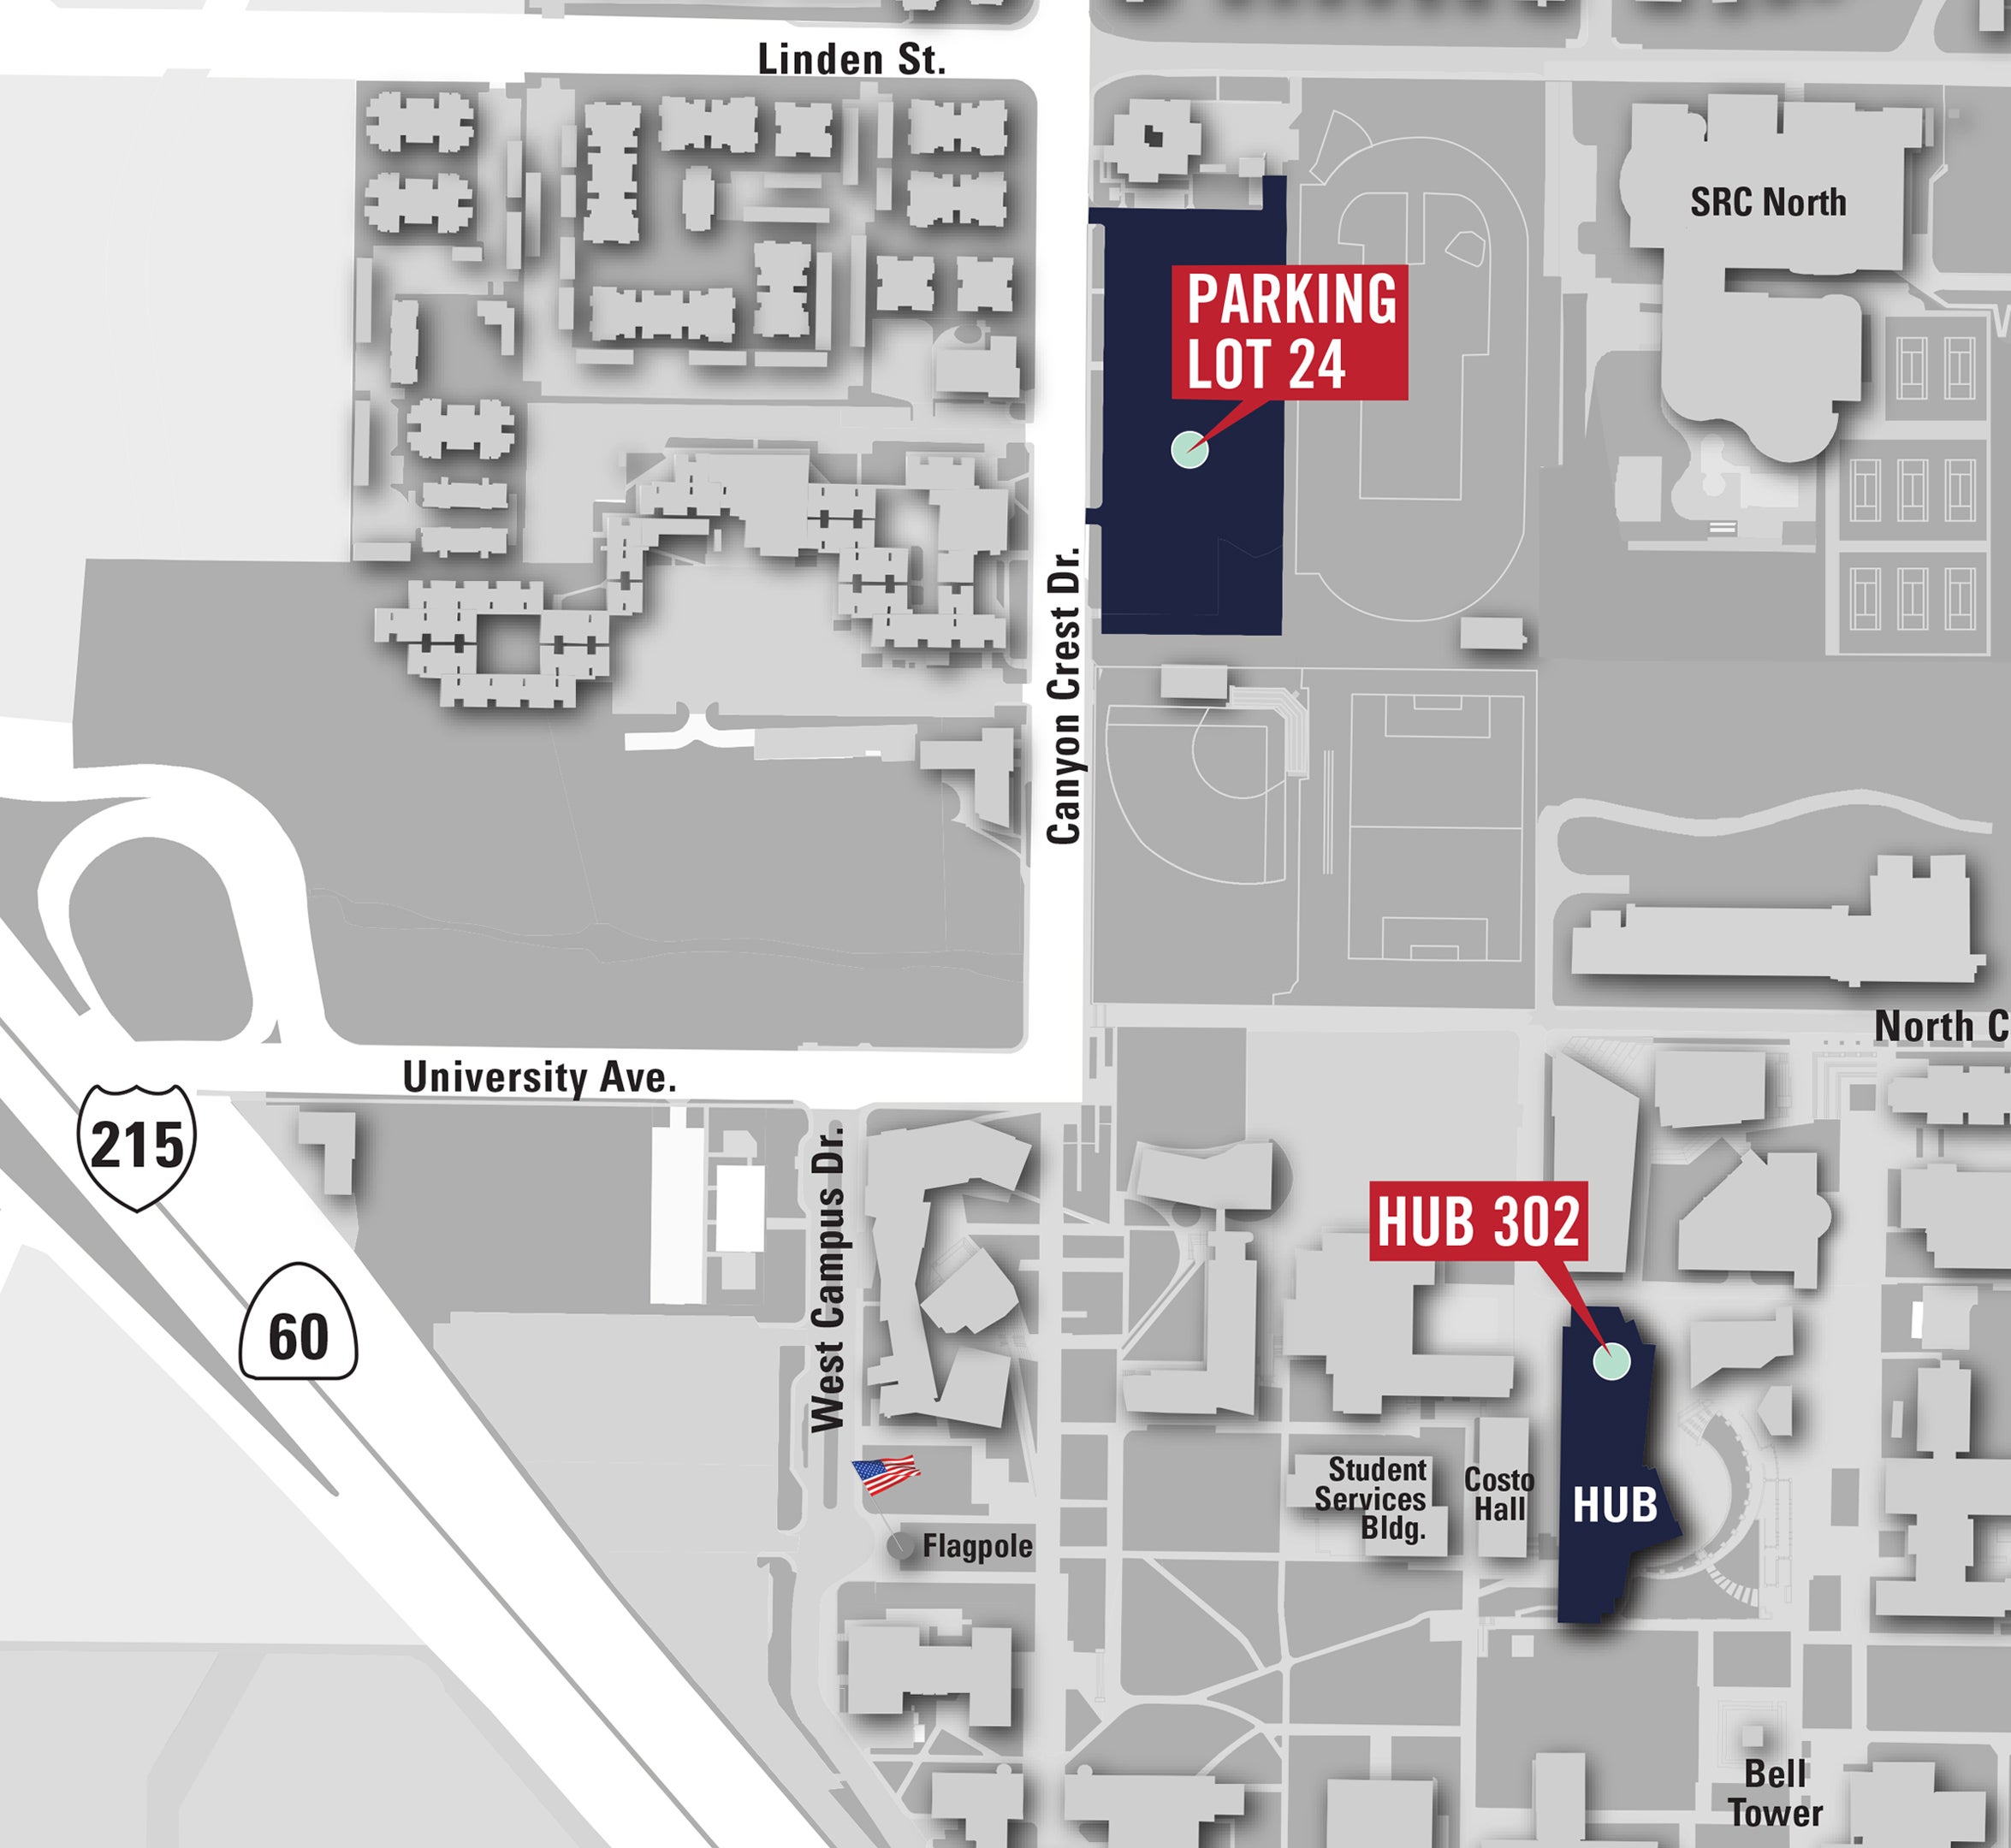 UCR campus map highlighting location of parking lot 25 and Highlander Union Building (HUB) 302.